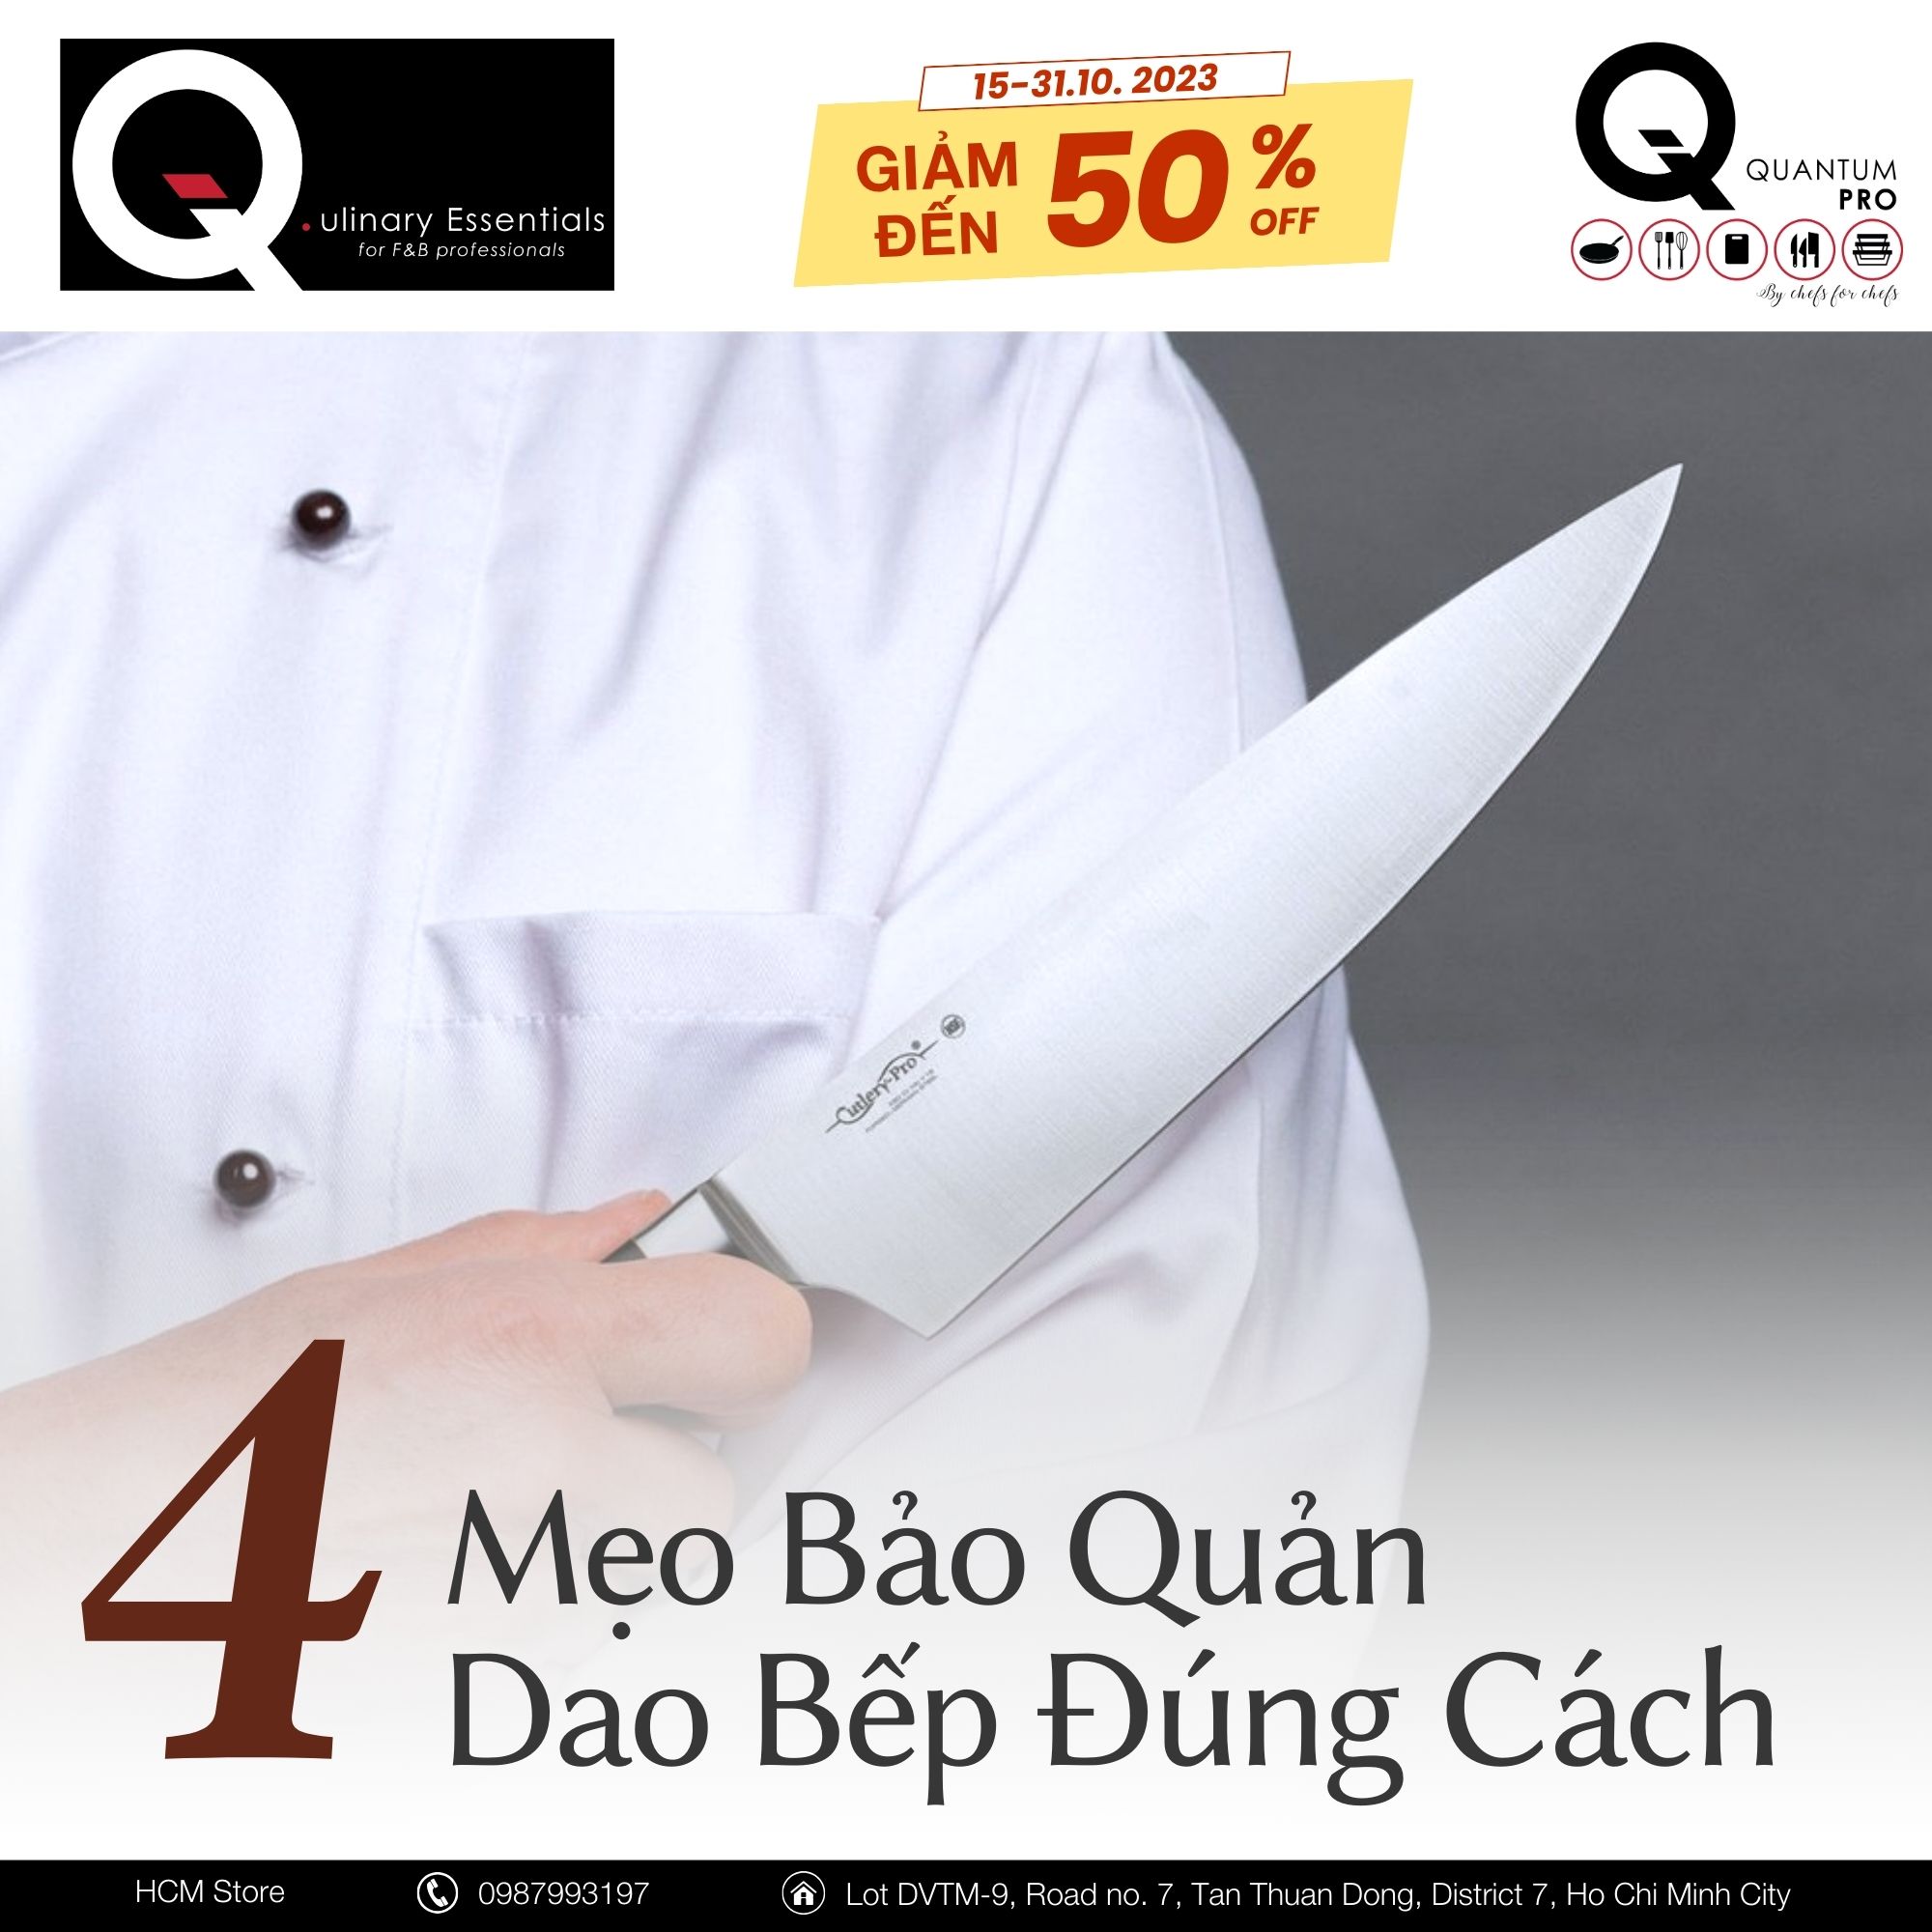 Proper Cleaning and Storage of Kitchen Knives? Reputable Kitchen Knife Stores in Hanoi